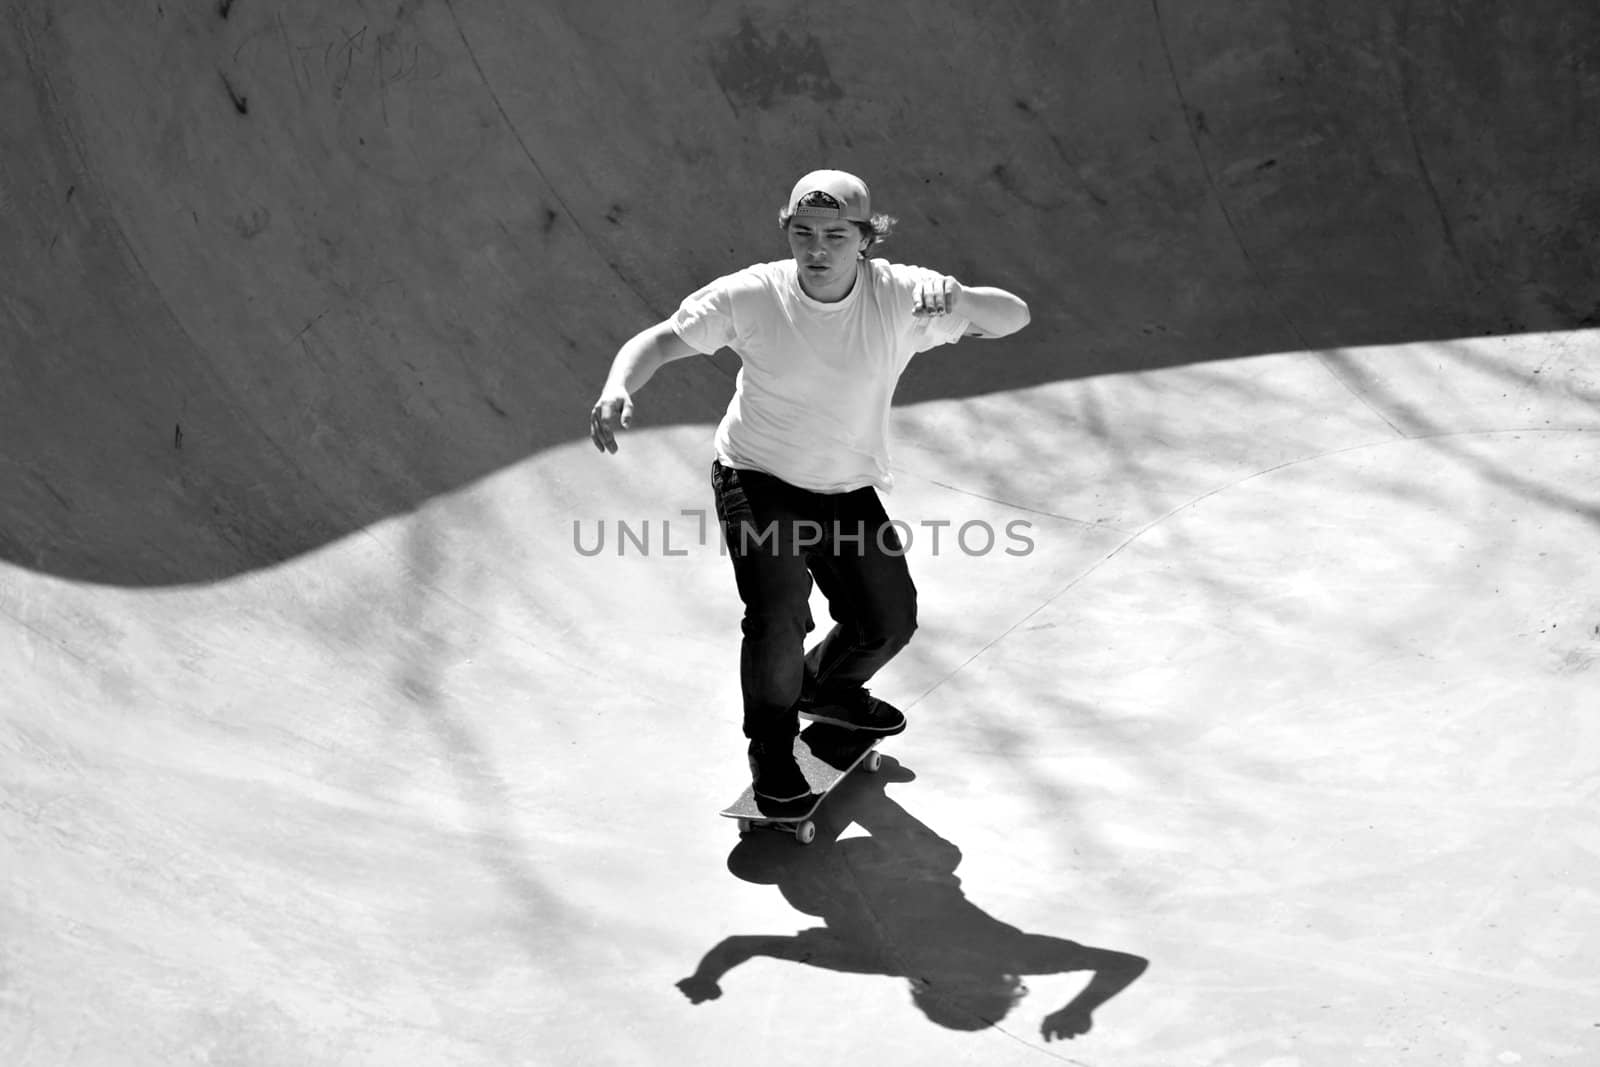 Skater Inside a Bowl by graficallyminded